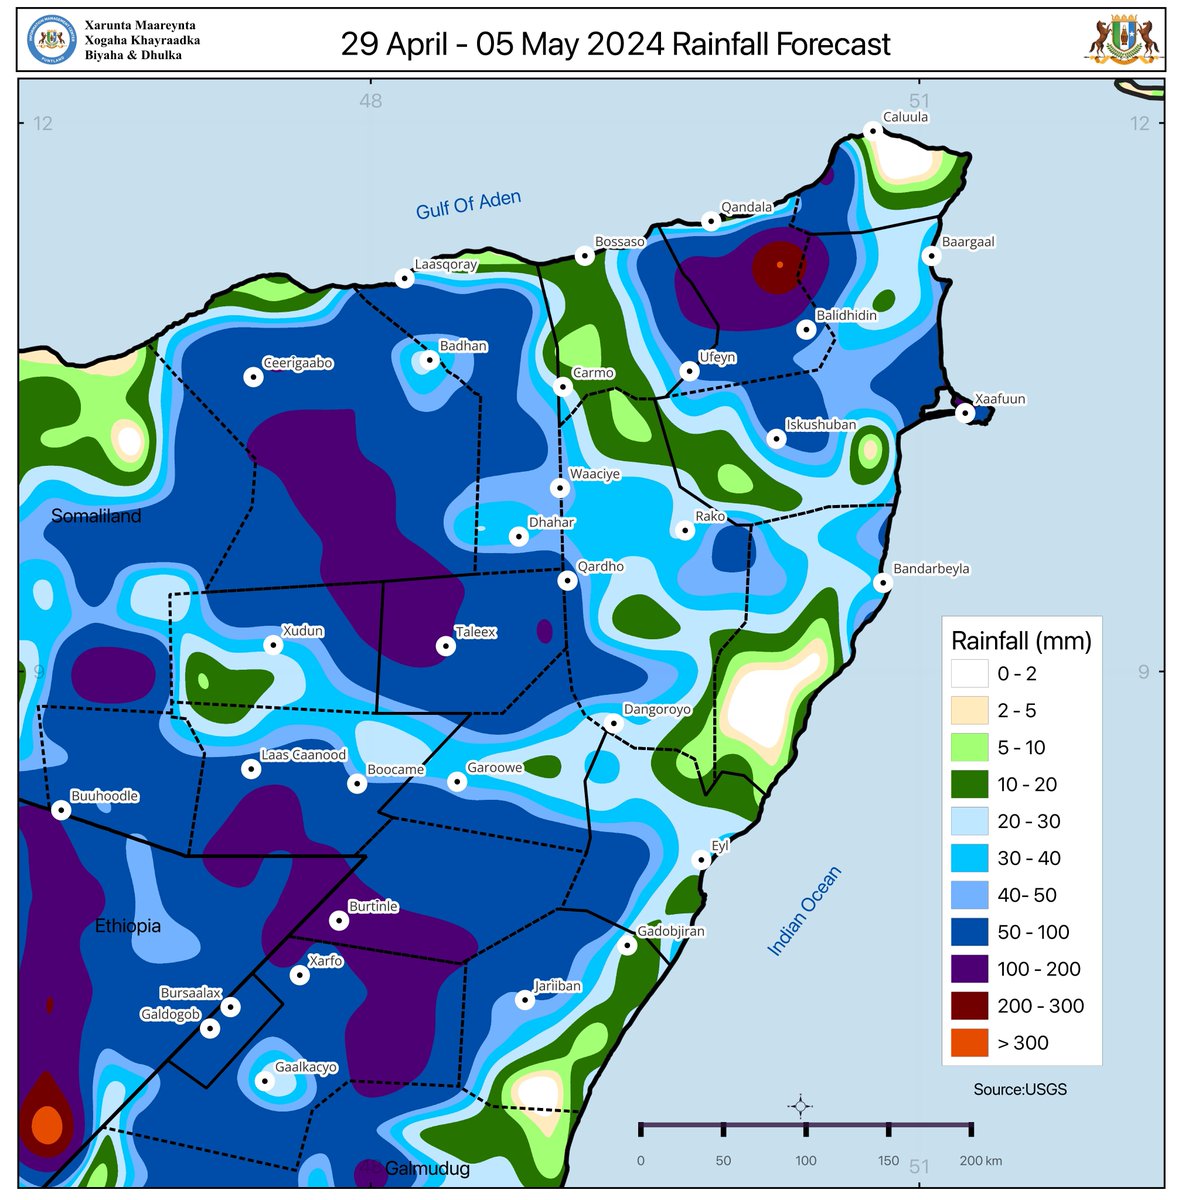 🌧️ Here is Putland's seven-day cumulative rainfall forecast from 29 April - 05 May 2024. #Puntland #Imc_Puntland